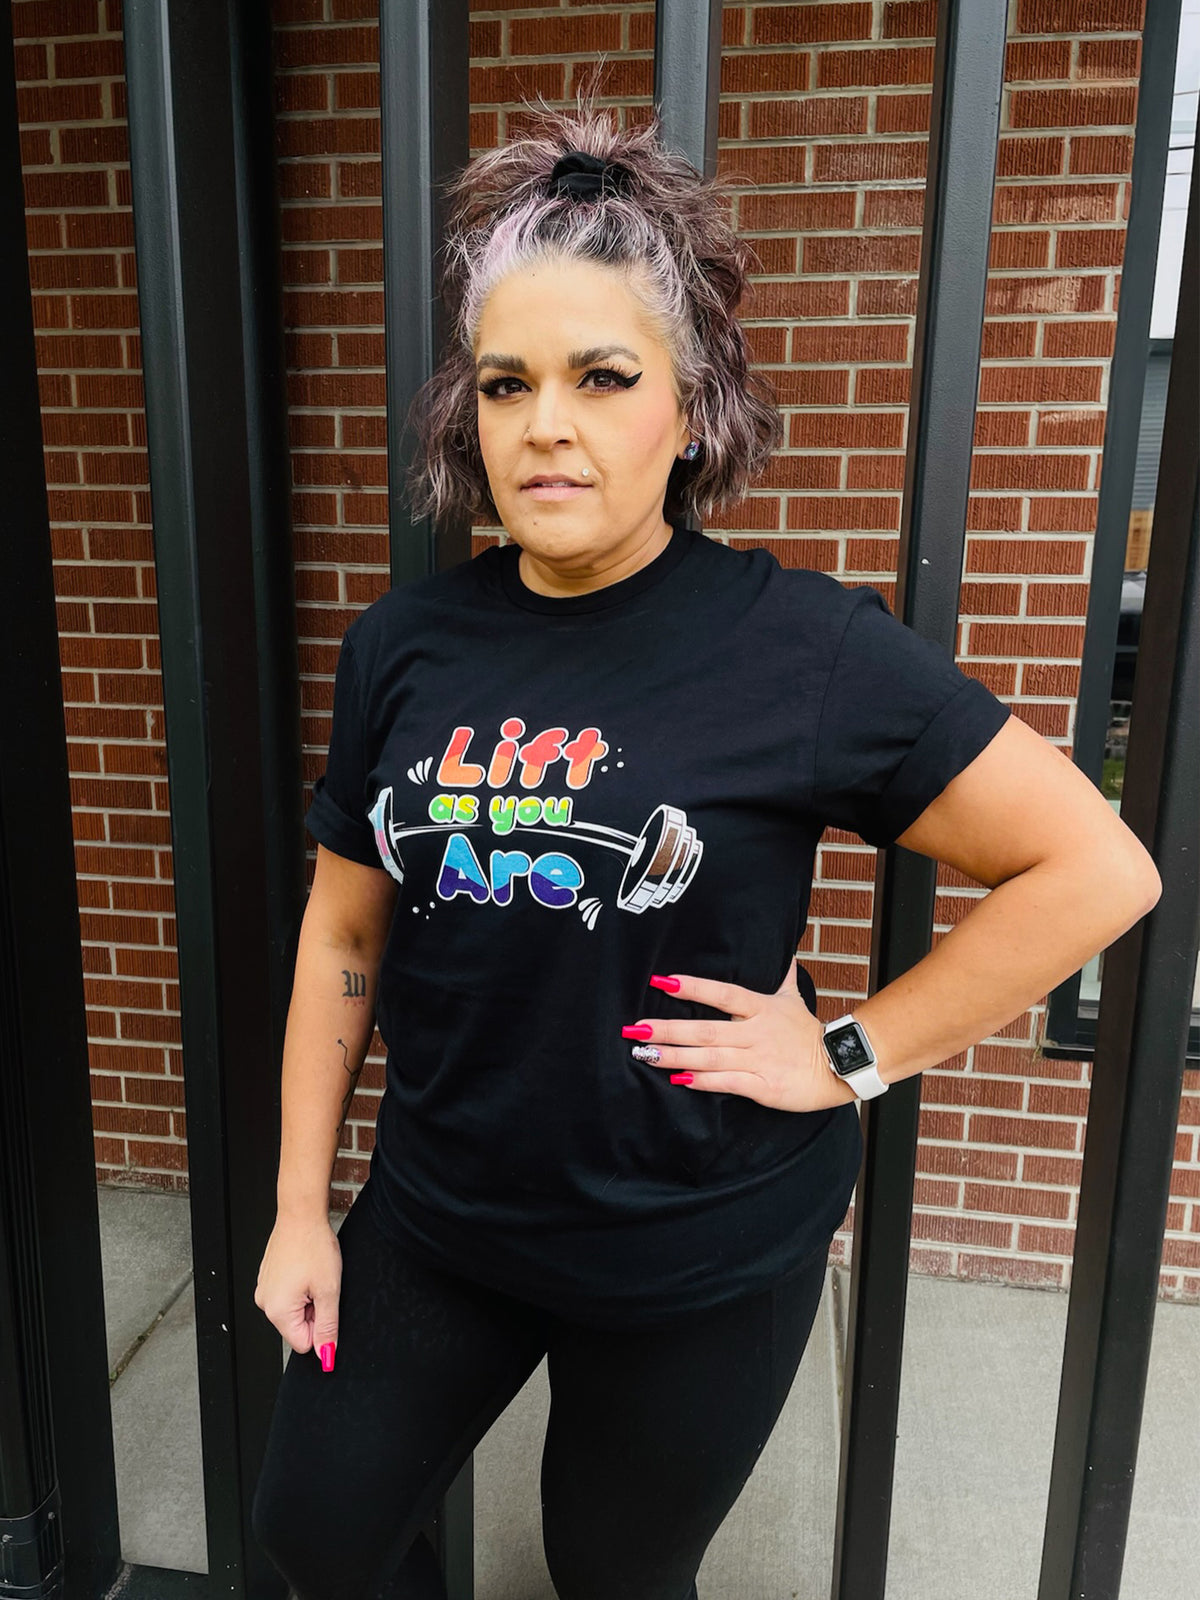 Lift as you Are - Special Edition Pride Shirt